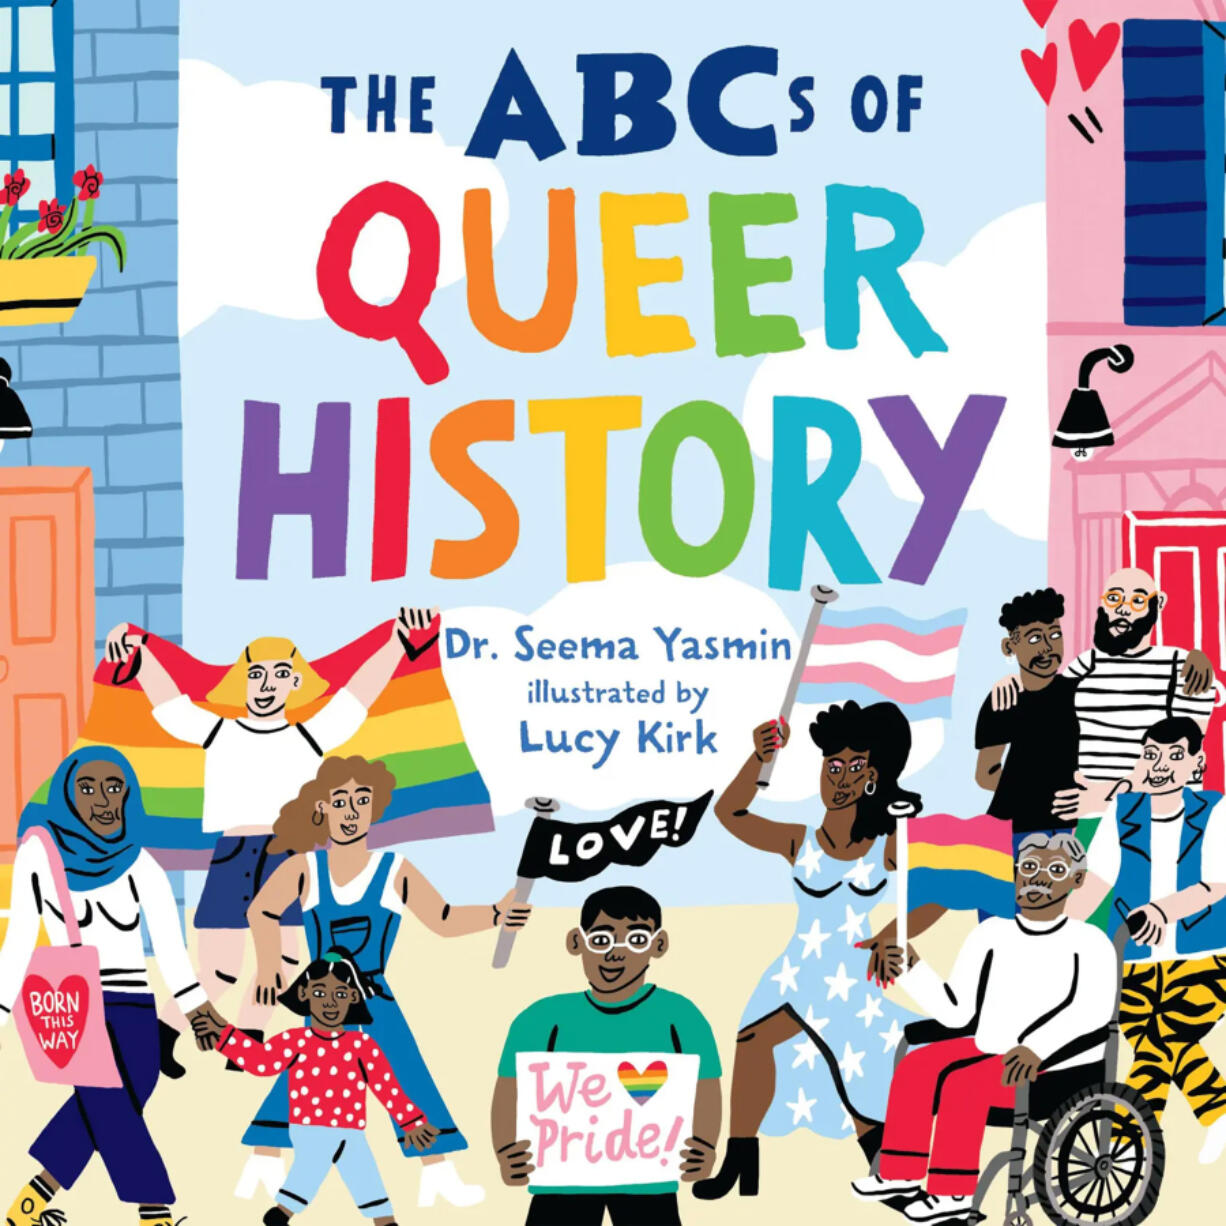 &ldquo;The ABCs of Queer History,&rdquo; by Dr. Seema Yasmin and illustrator Lucy Kirk.